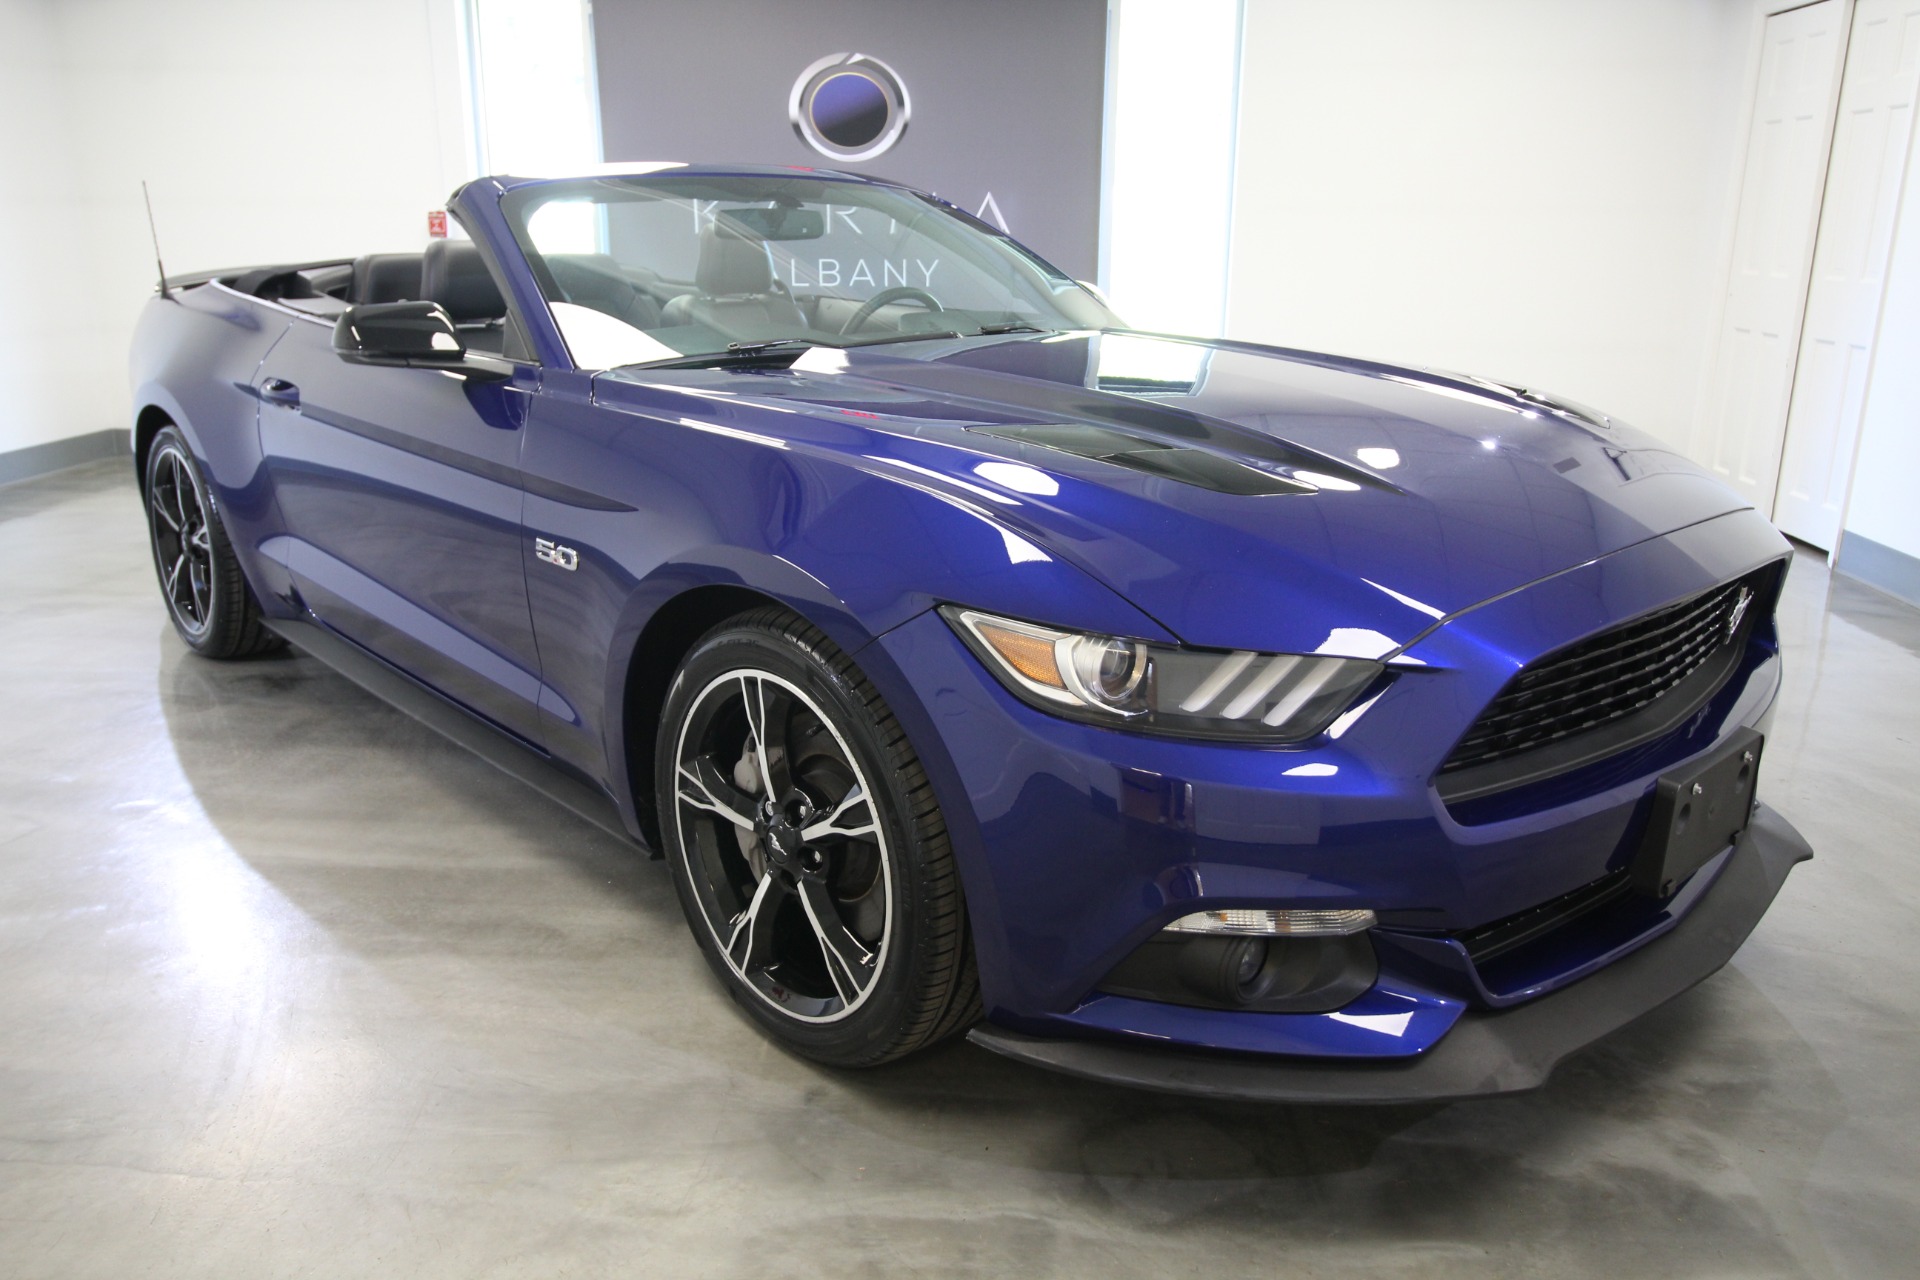 Used 2016 BLUE Ford Mustang GT CONVERTIBLE CALIFORNIA EDITION | Albany, NY